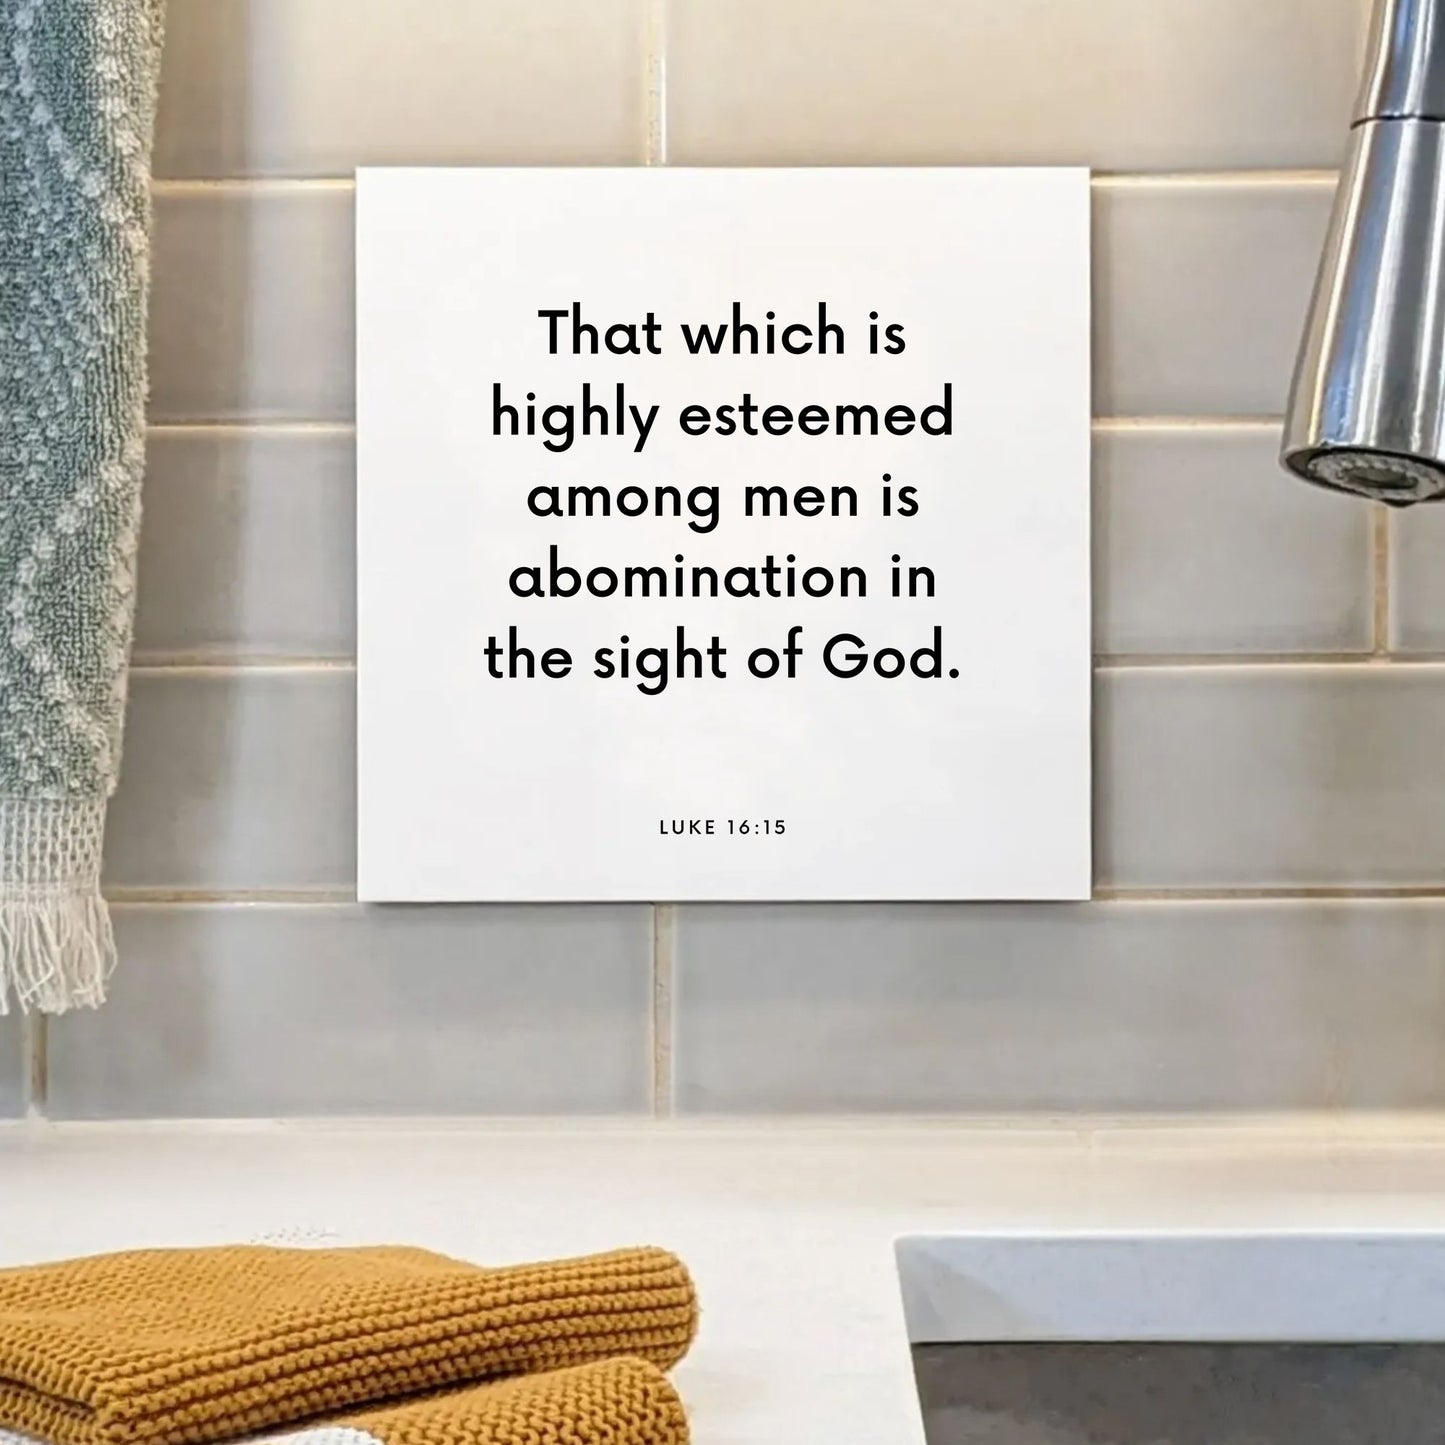 Sink mouting of the scripture tile for Luke 16:15 - "That which is highly esteemed among men is abomination"